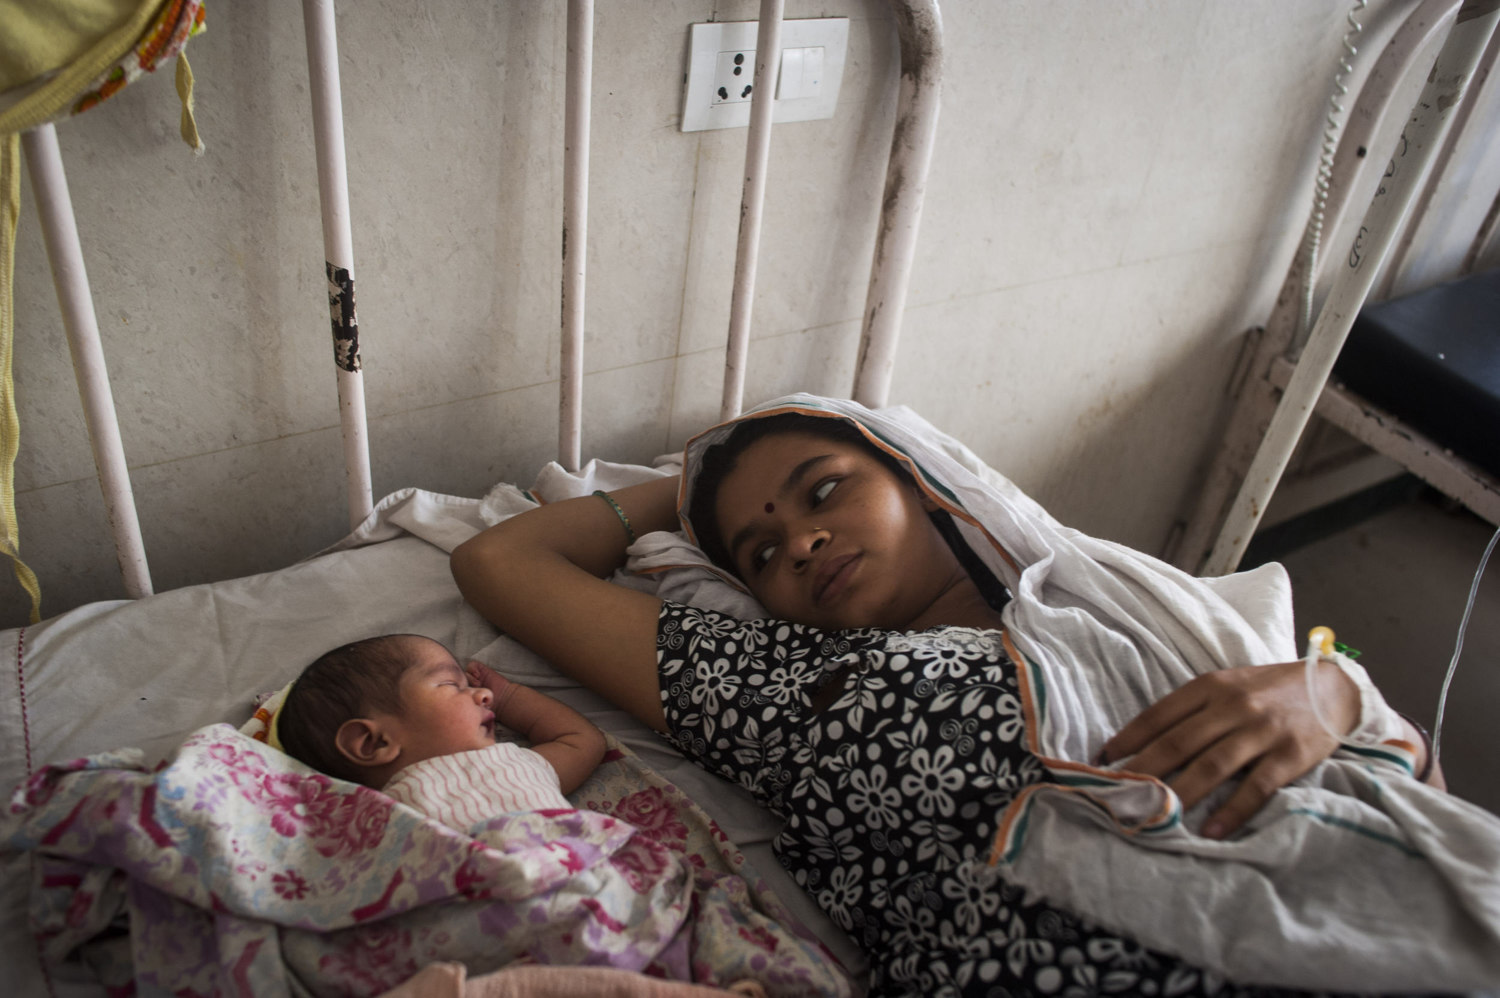  Jyoti and her newborn daughter who she will maybe name Rohini at the Gurgaon Hospital outside of New Delhi, India, where- defying statistics more girls are born than boys. Up to 50 million girls and women are missing from India's population as a res